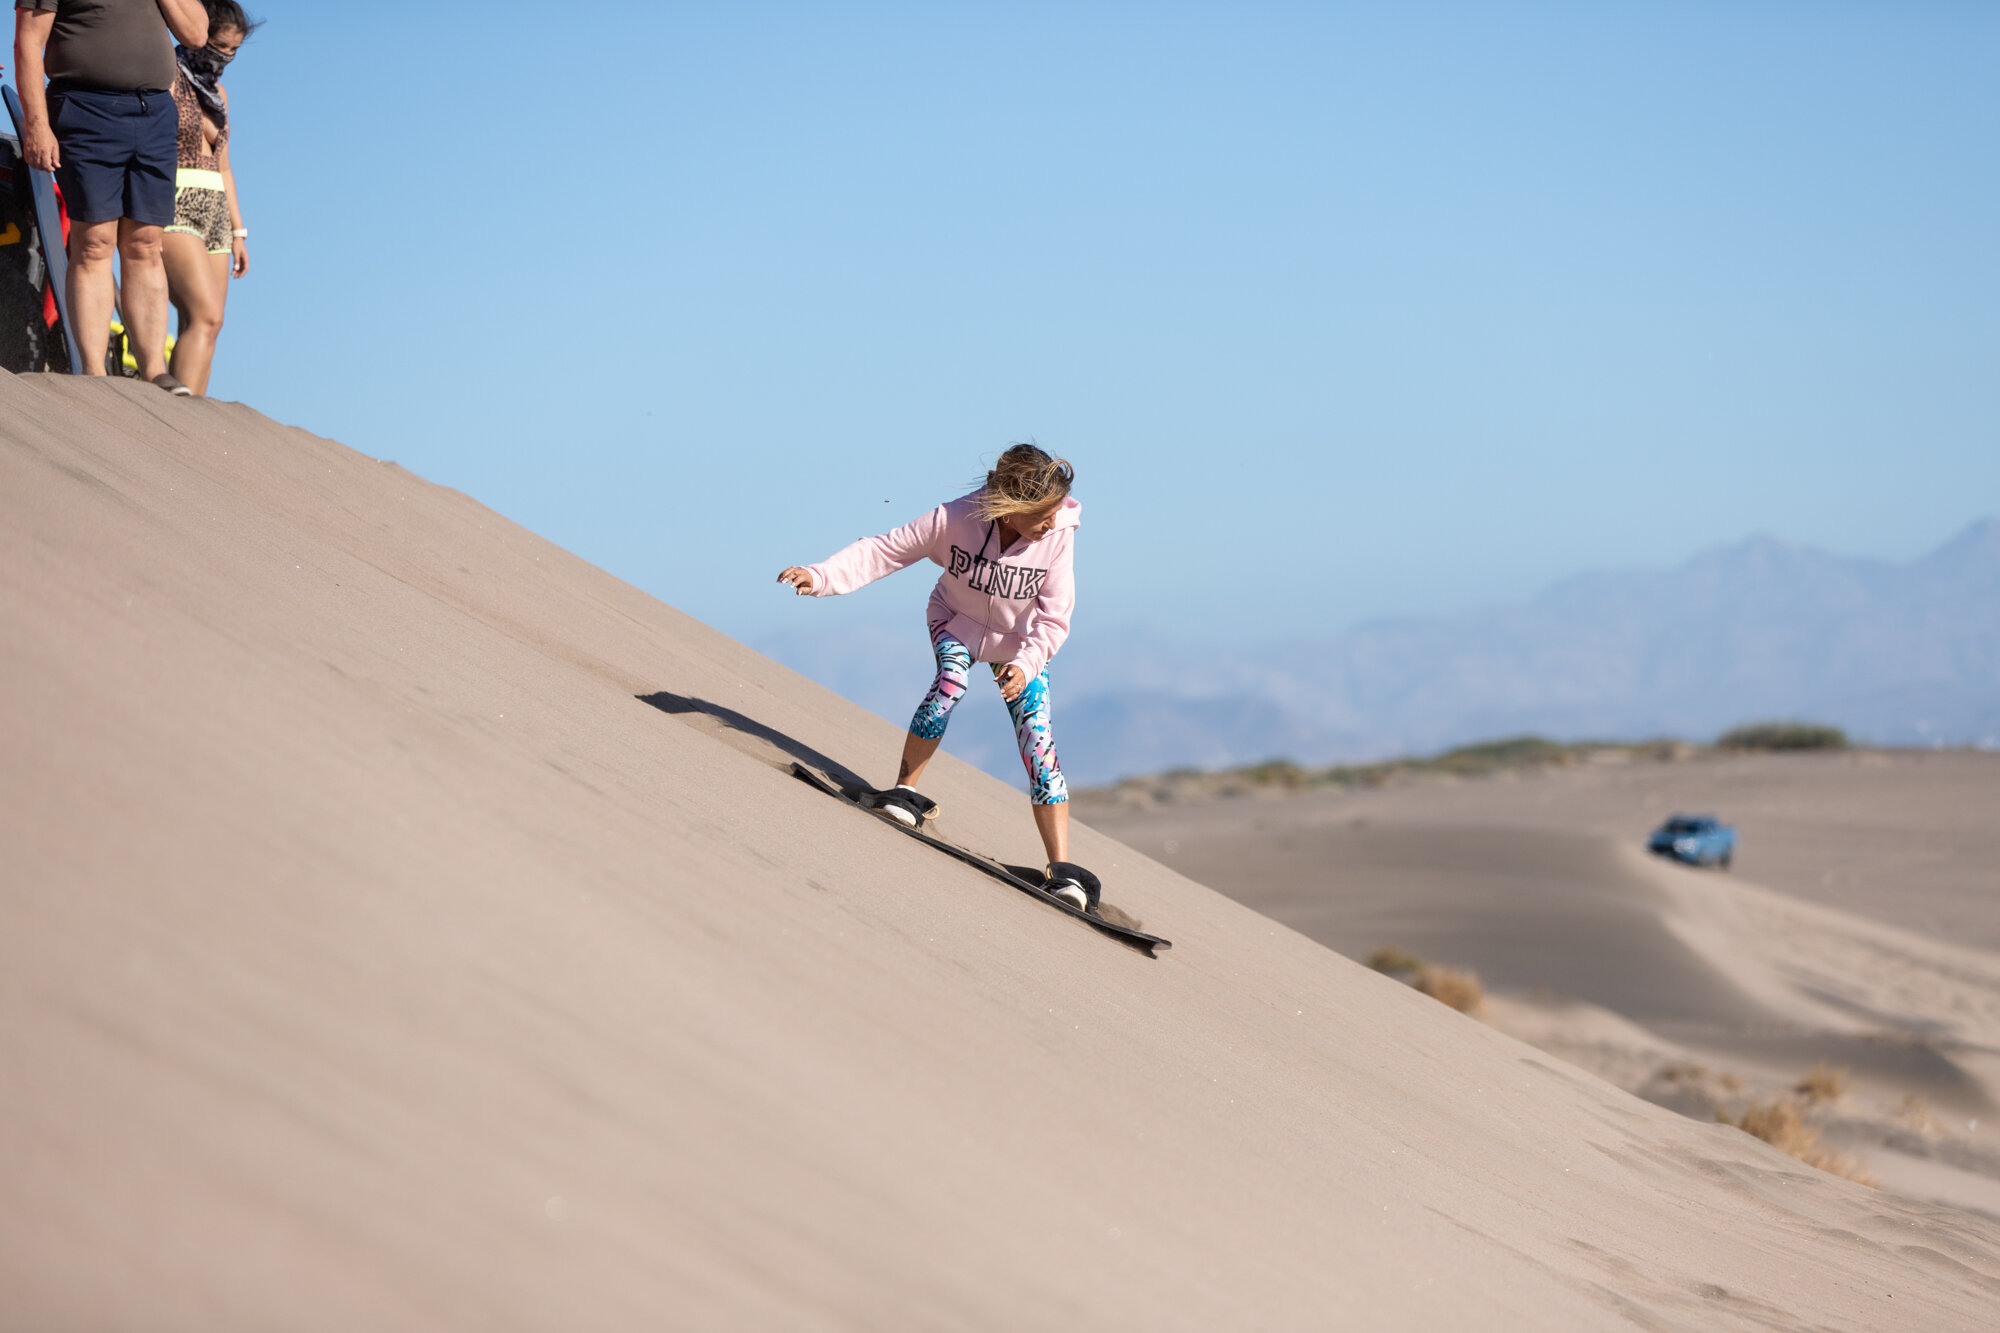 Riding the Sand Dunes